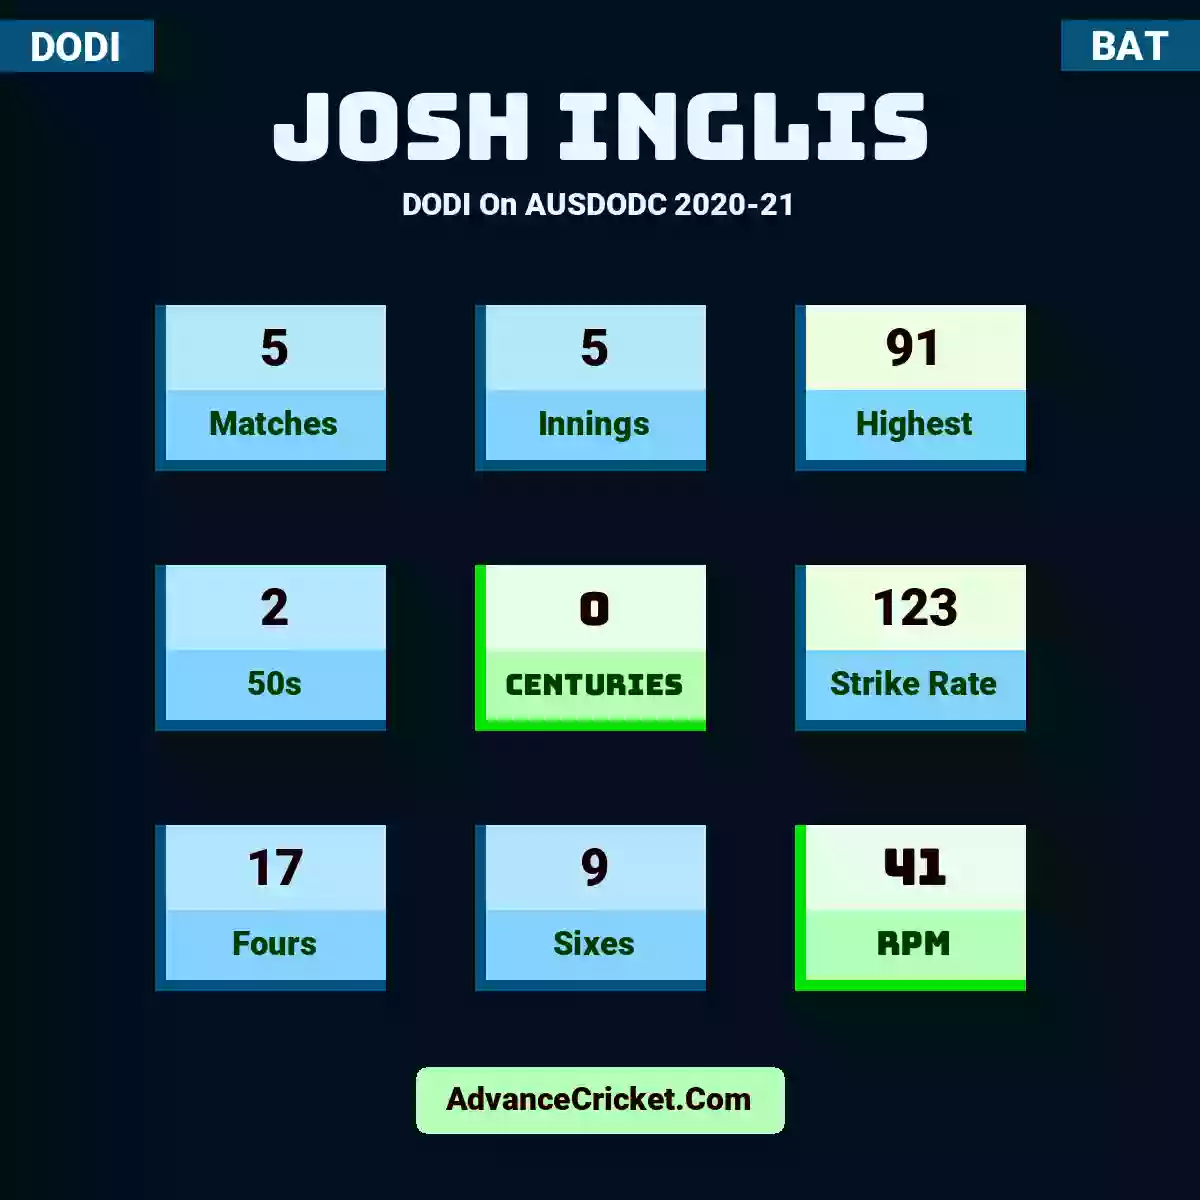 Josh Inglis DODI  On AUSDODC 2020-21, Josh Inglis played 5 matches, scored 91 runs as highest, 2 half-centuries, and 0 centuries, with a strike rate of 123. J.Inglis hit 17 fours and 9 sixes, with an RPM of 41.